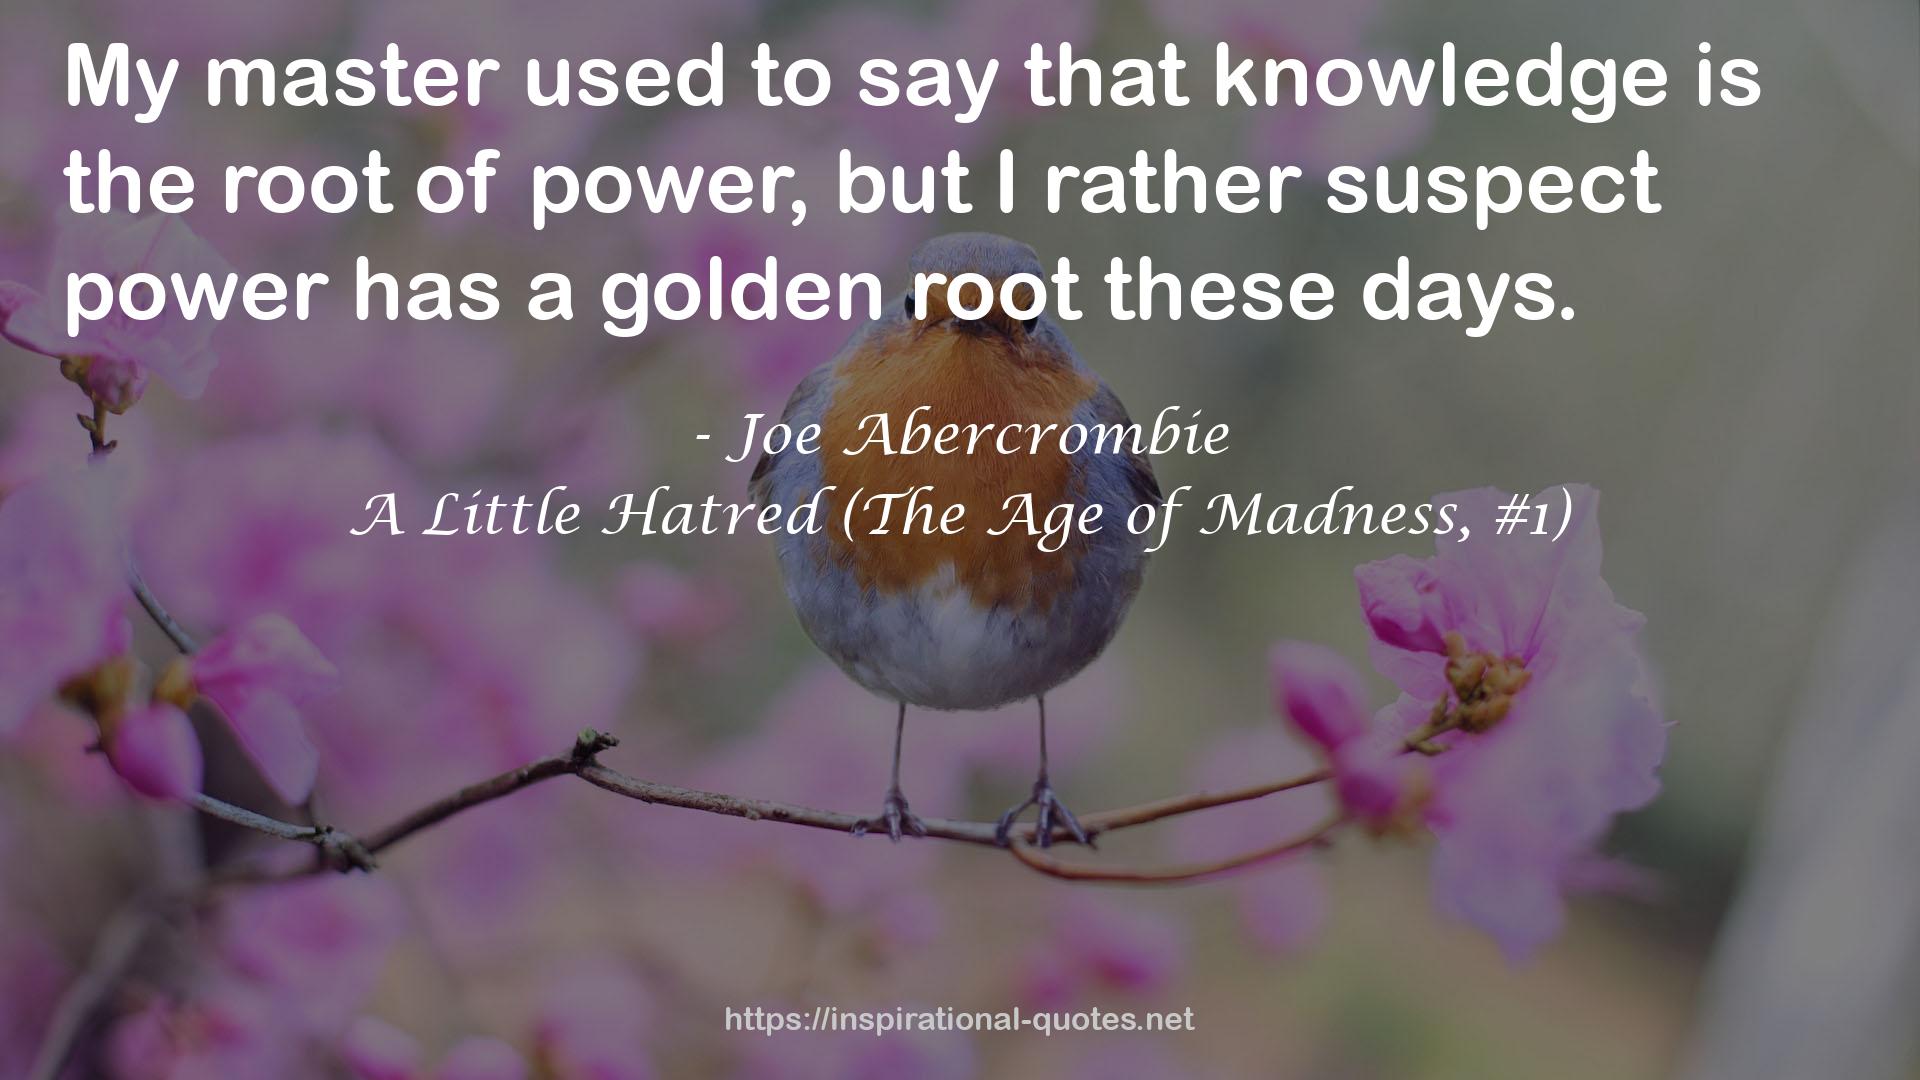 A Little Hatred (The Age of Madness, #1) QUOTES